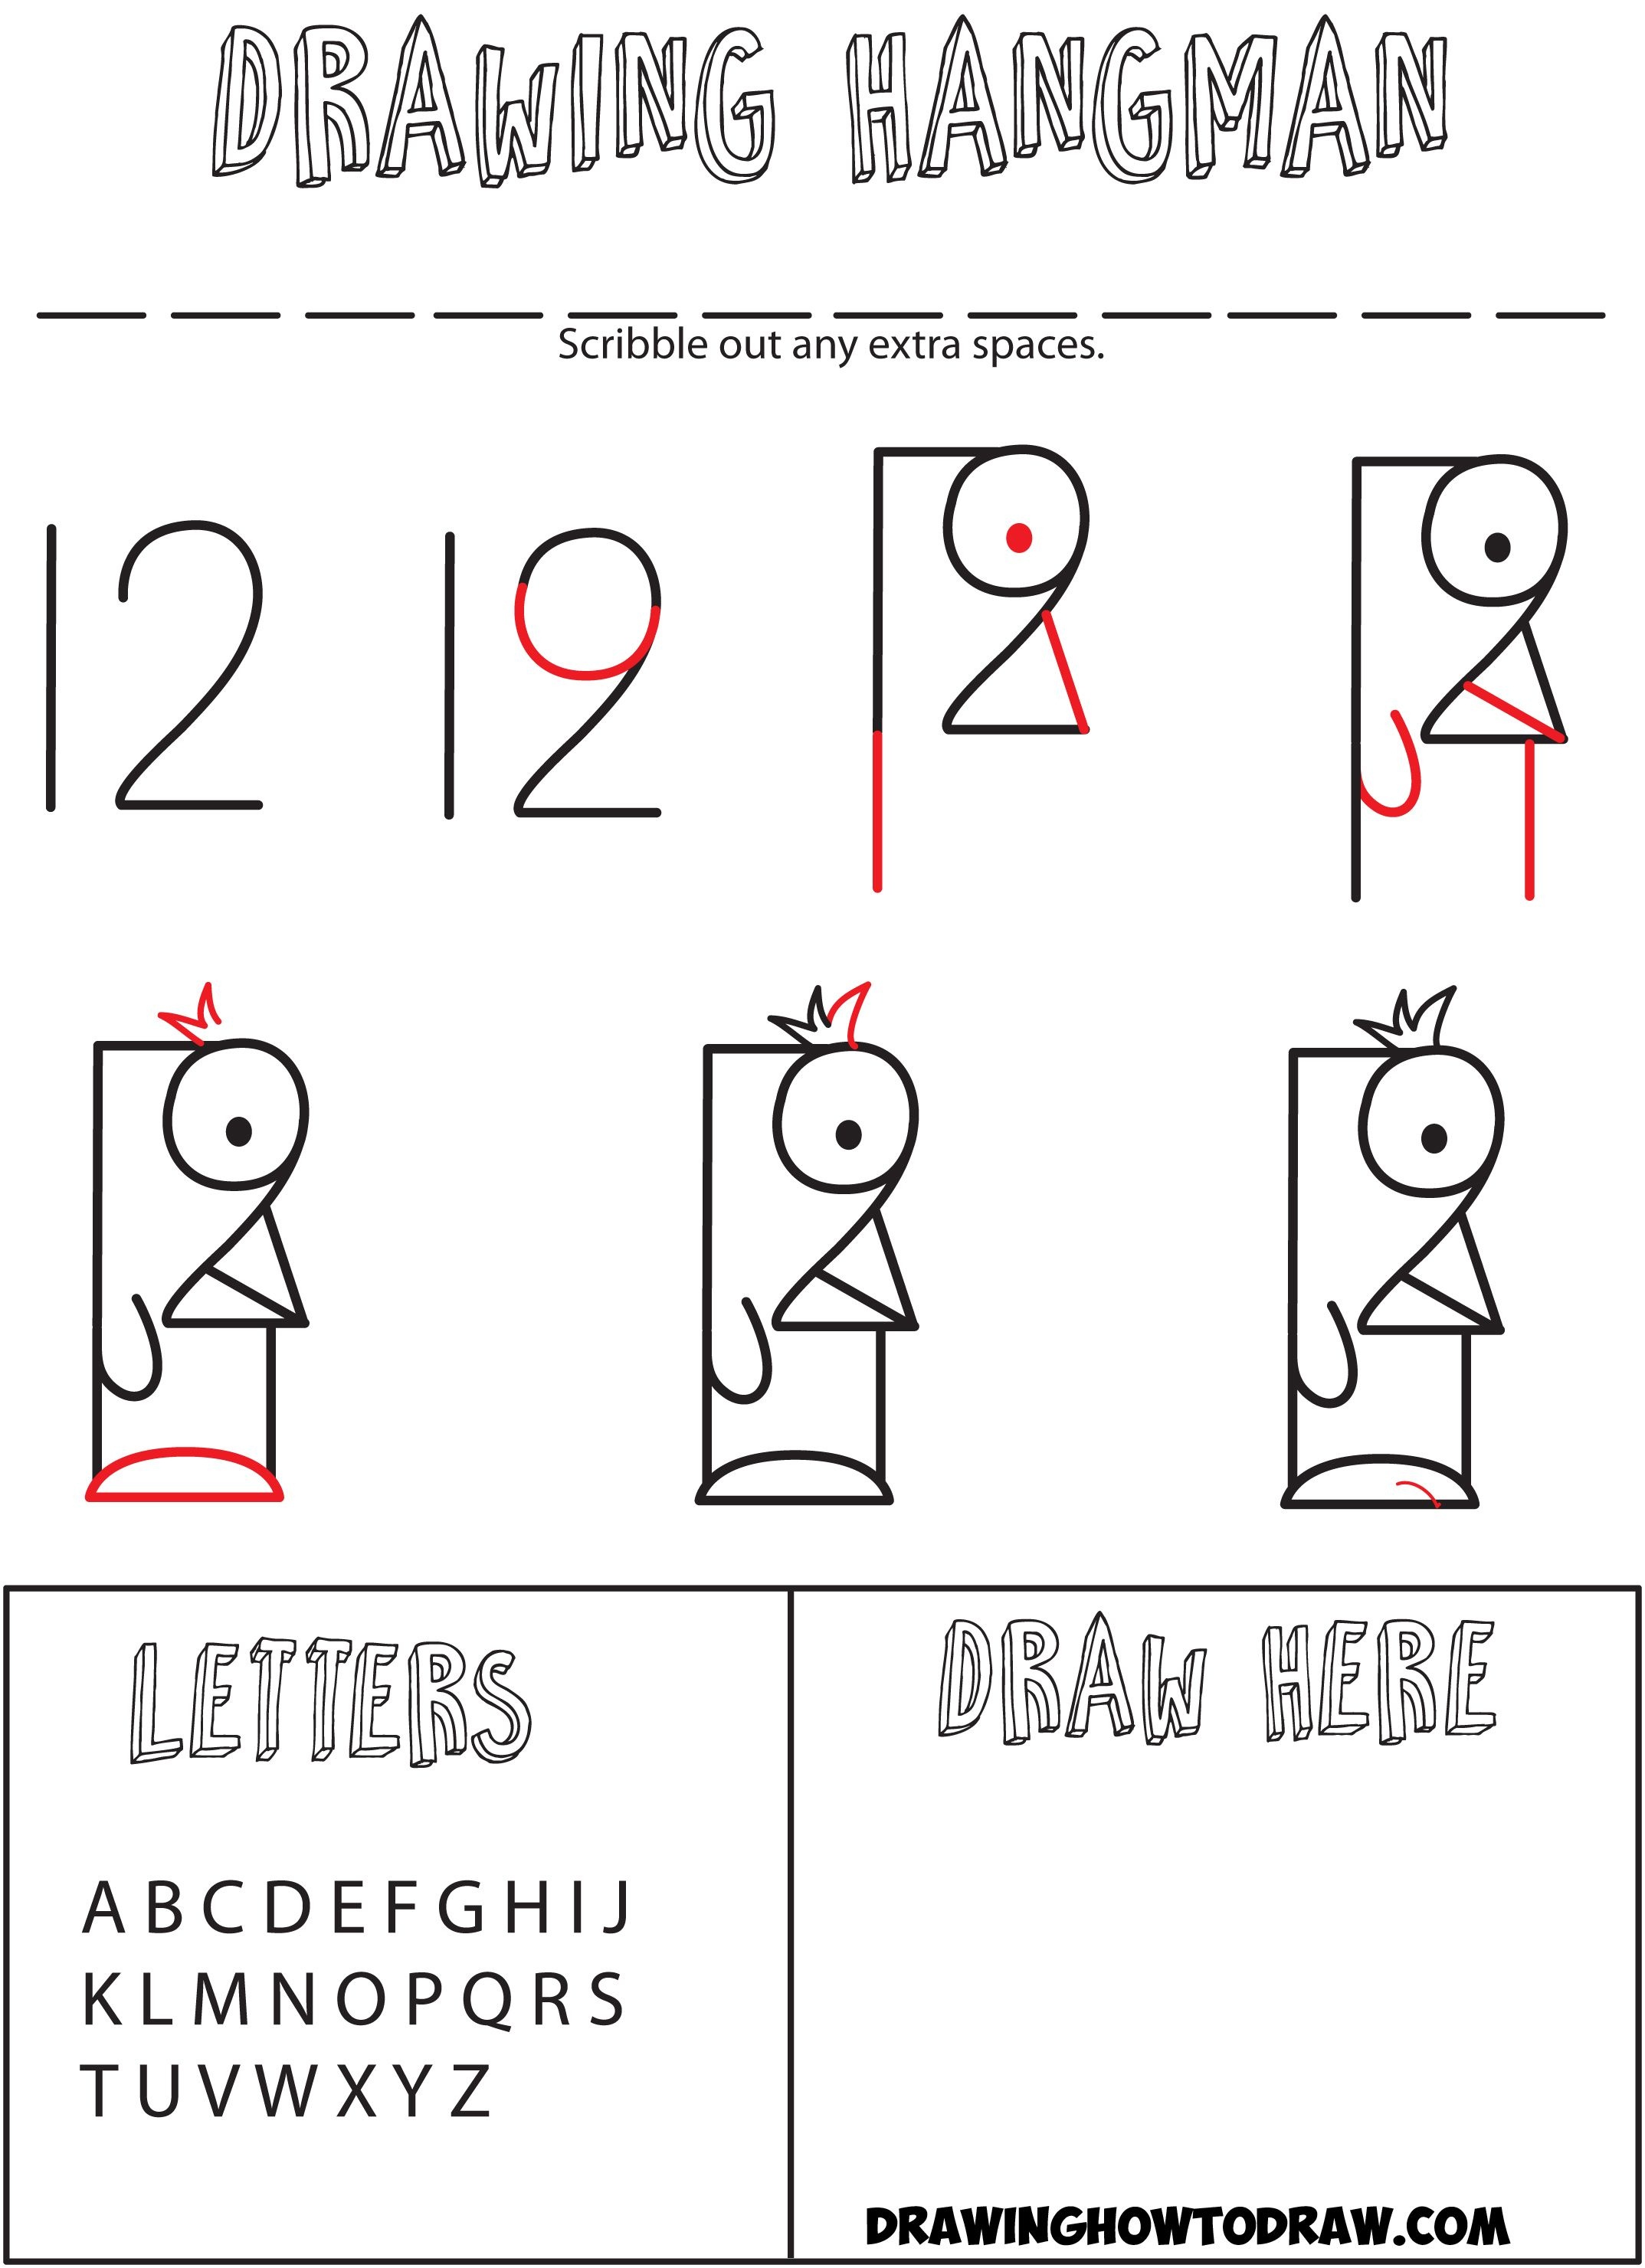 Play Drawing Hangman With These Free Drawing Hangman Sheets From Our - Free Printable Hangman Game